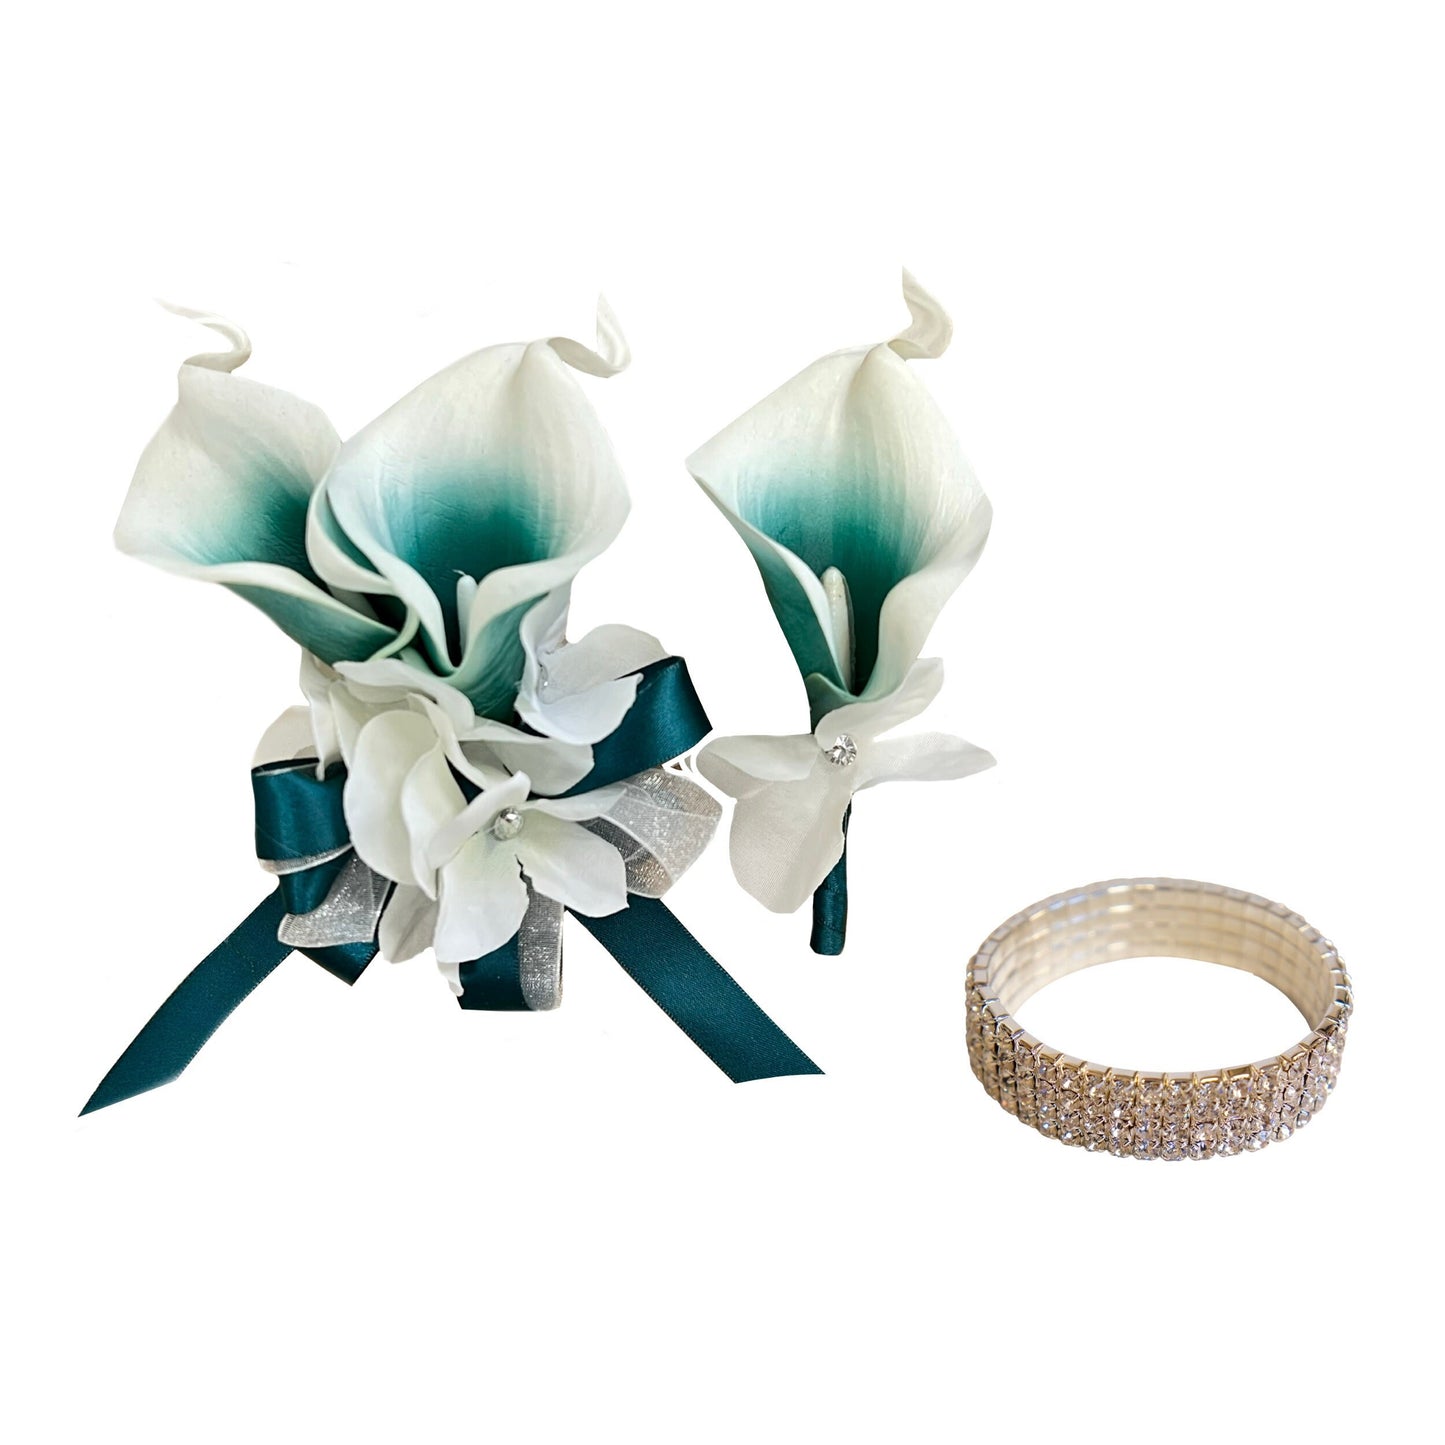 Teal Calla Lily Wedding Corsage & Boutonniere Set with Pearls & Rhinestones